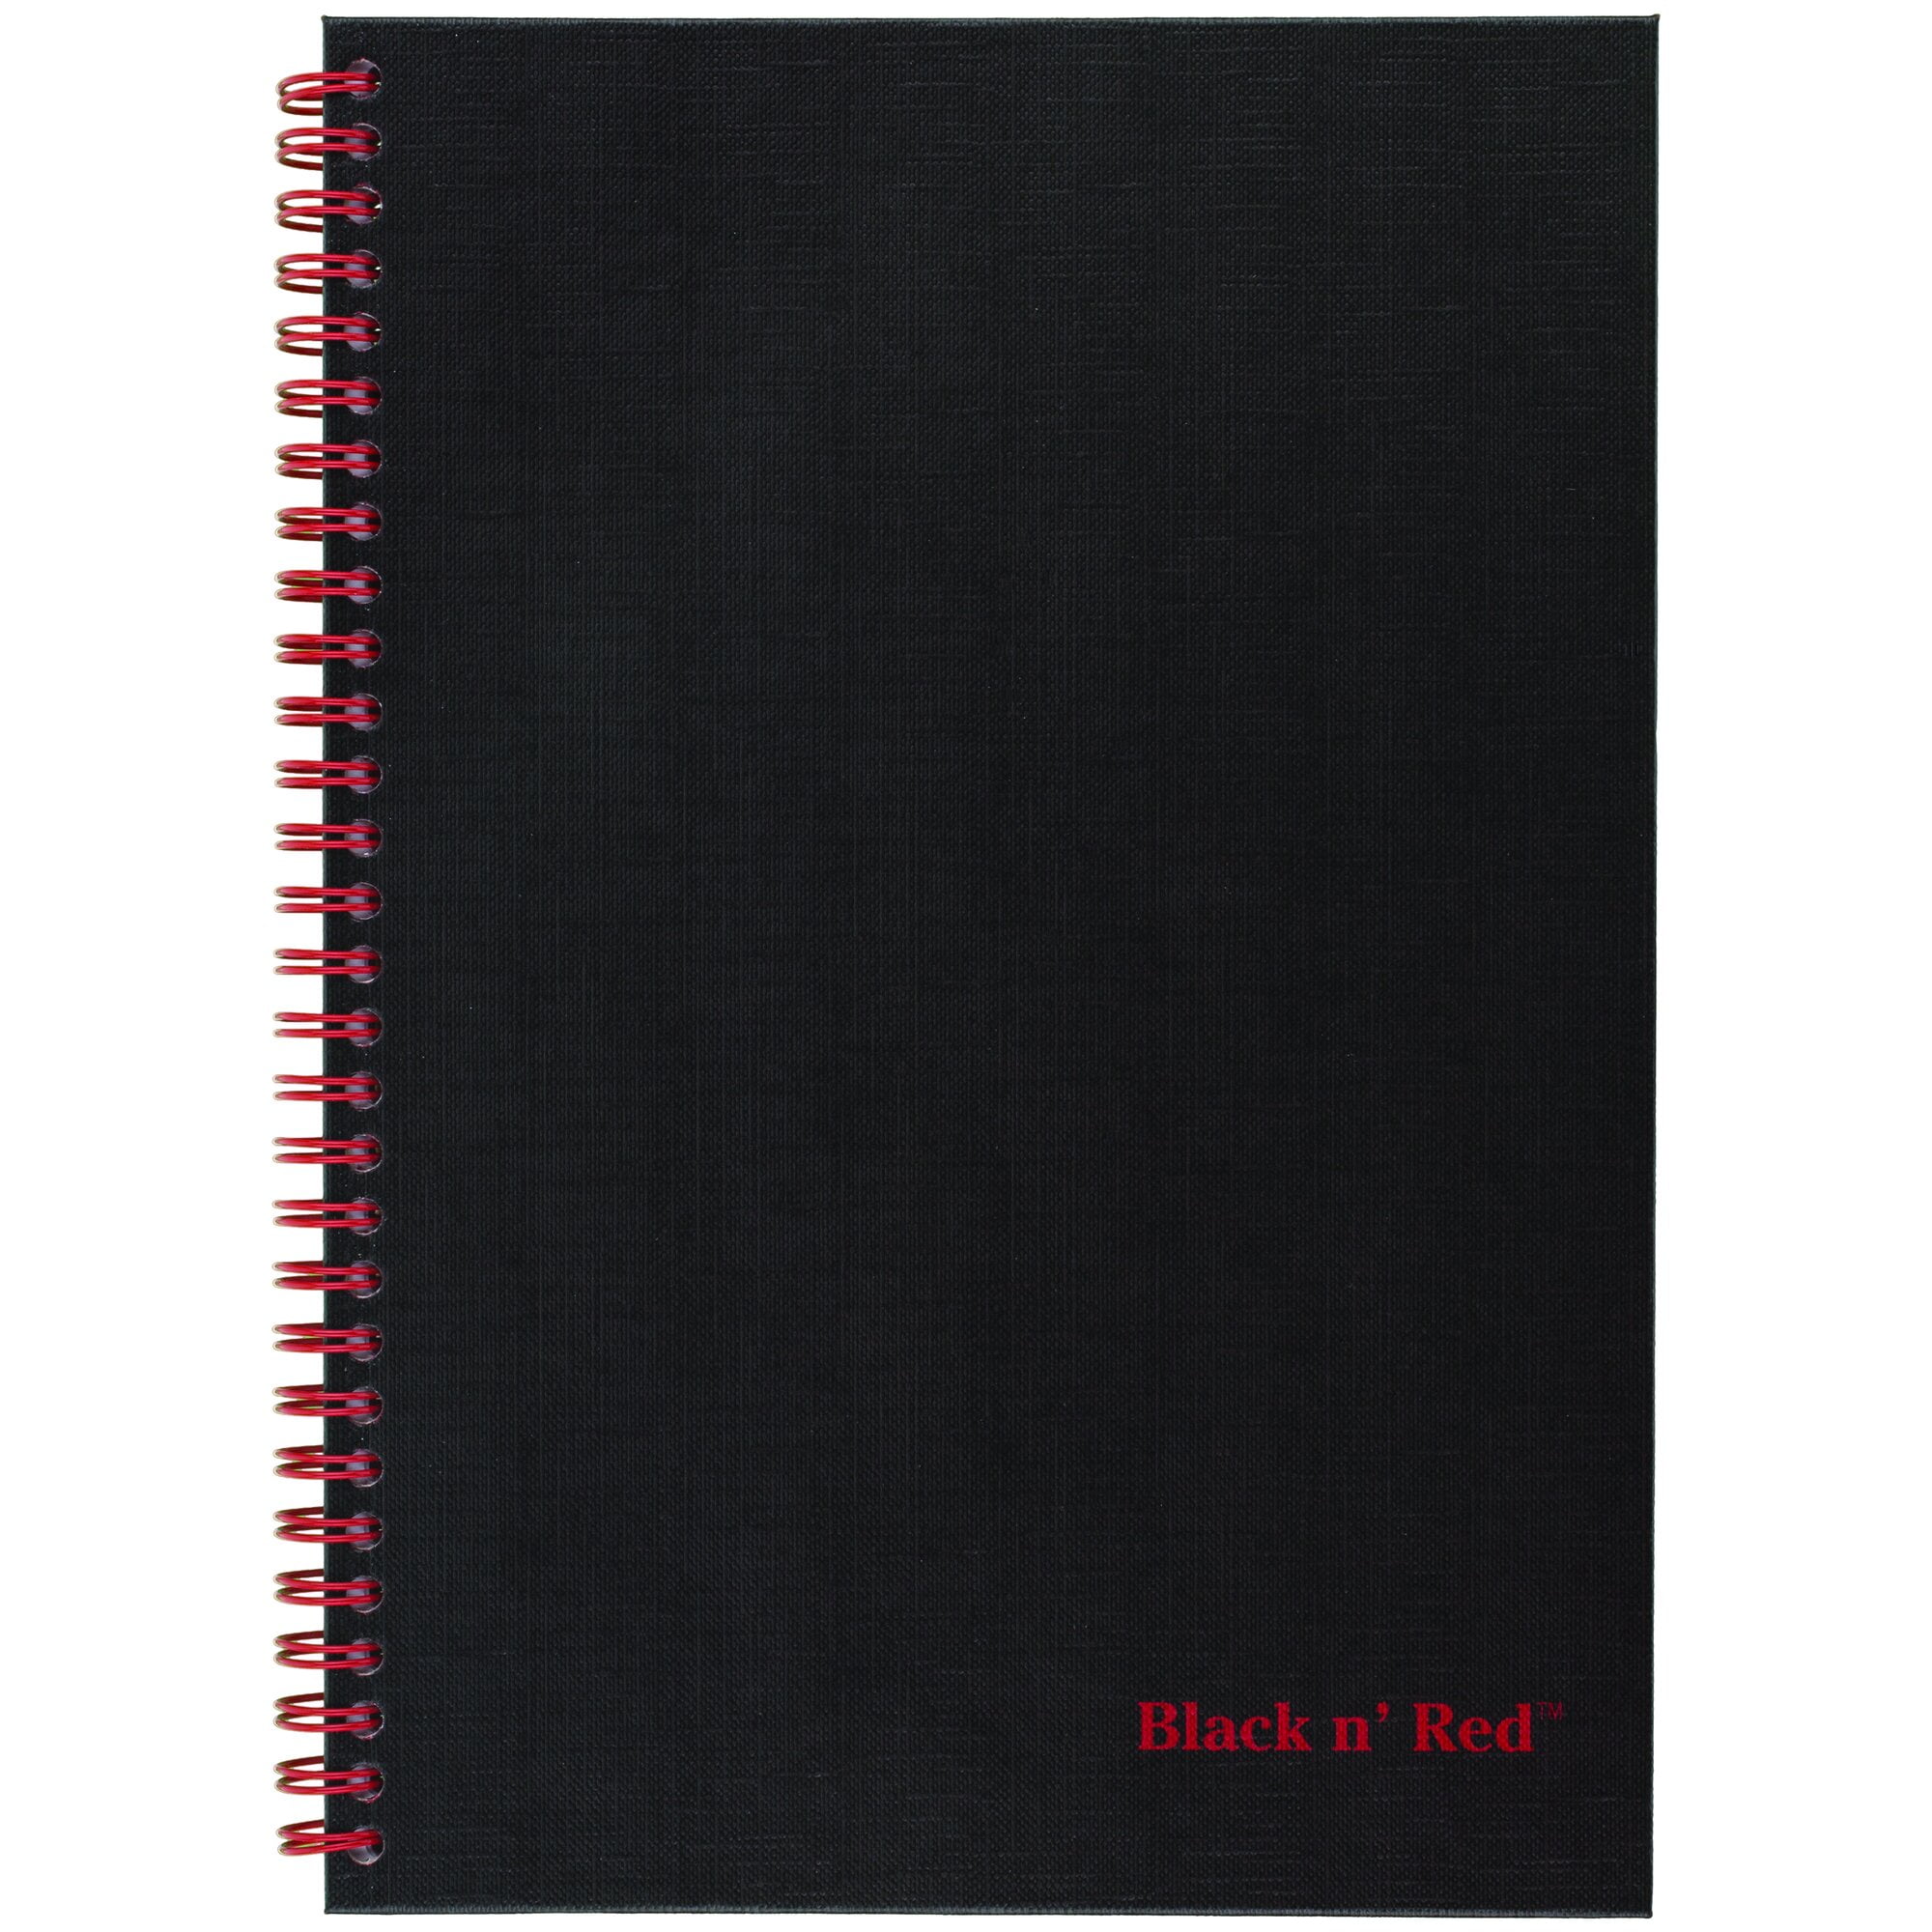 Twin Spiral Wirebound 70 Rul Large Black/Red Black N' Red Hardcover Notebook 